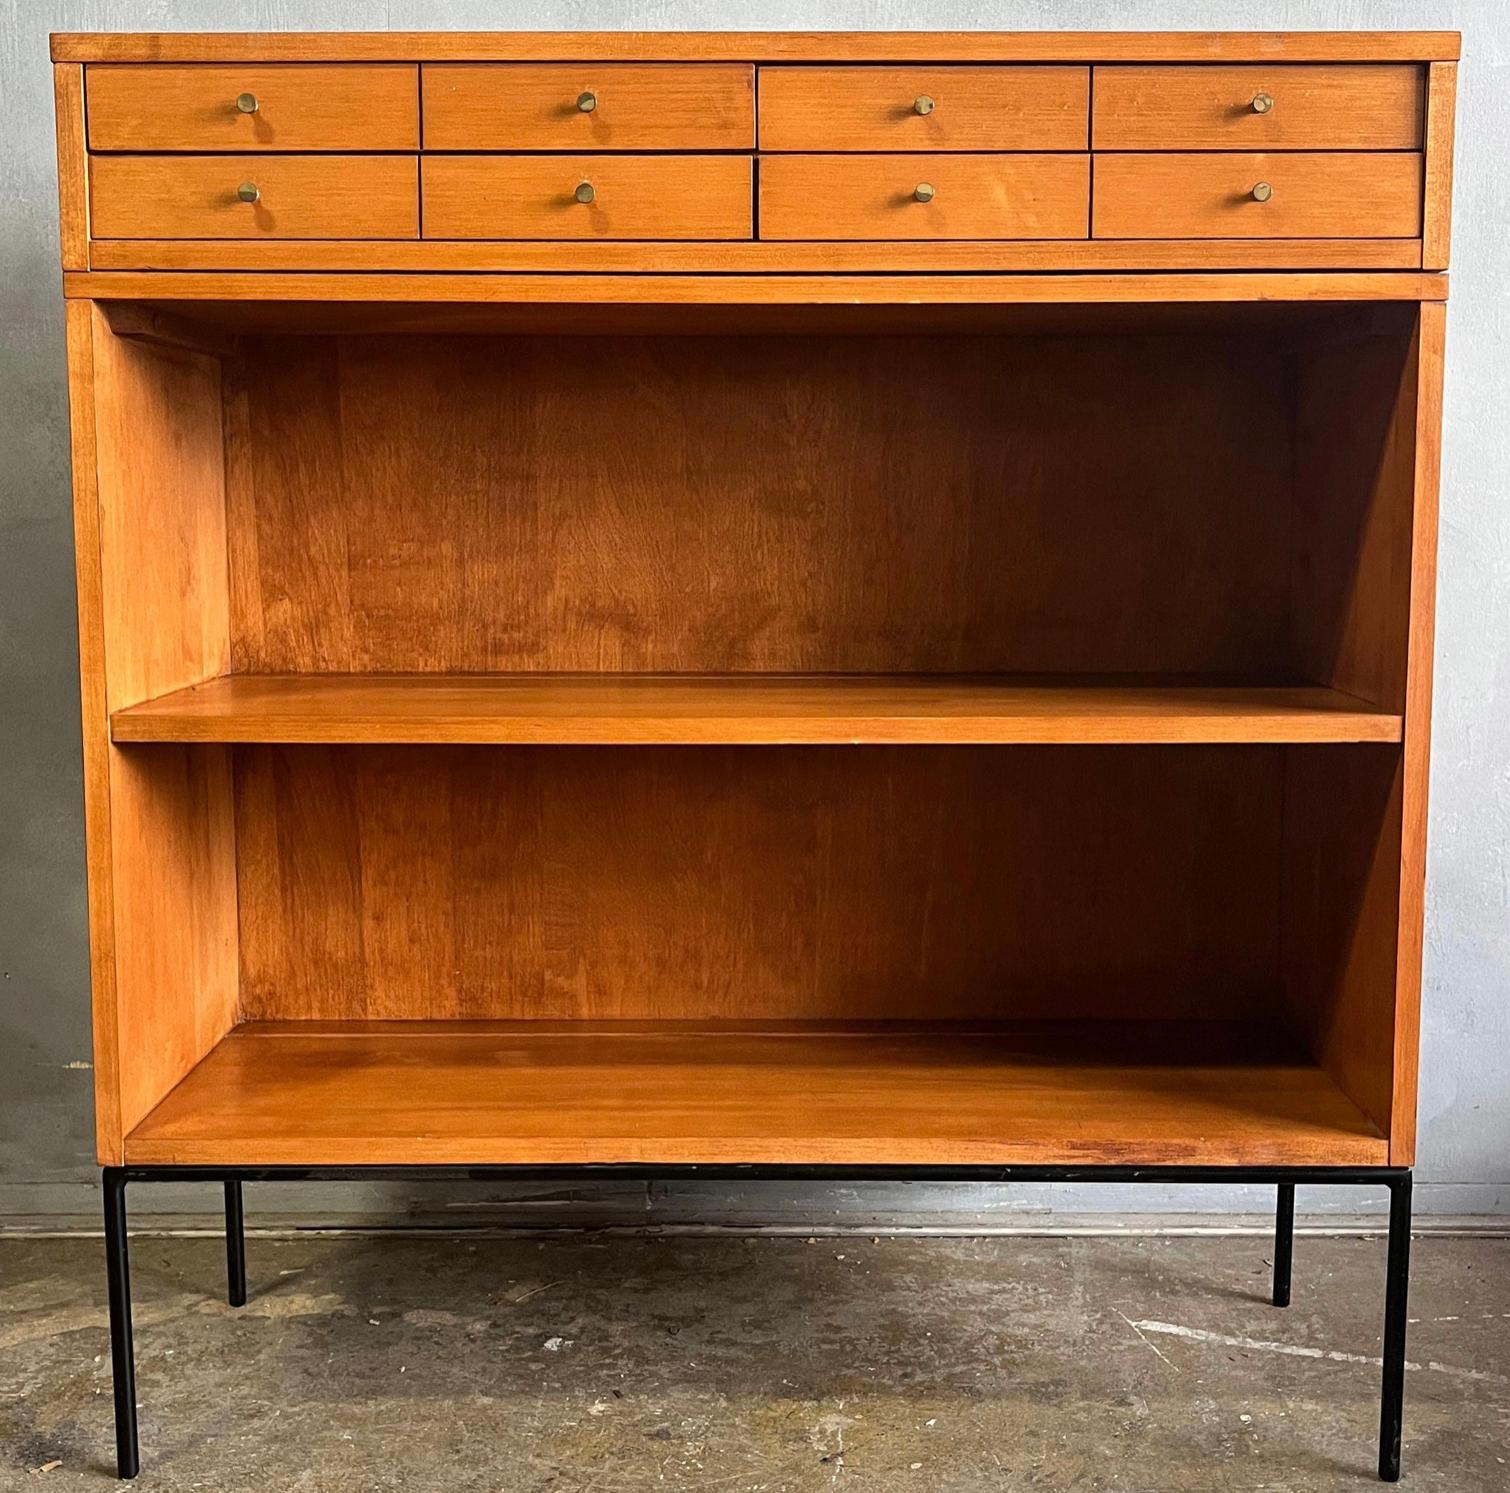 Vintage midcentury Paul McCobb single bookcase #1516 or display cabinet. Solid maple with on iron base. Beautiful bookcase by Paul McCobb, circa 1950s Planner Group, Included is the detachable 4-drawer miniature chest of drawers as originally